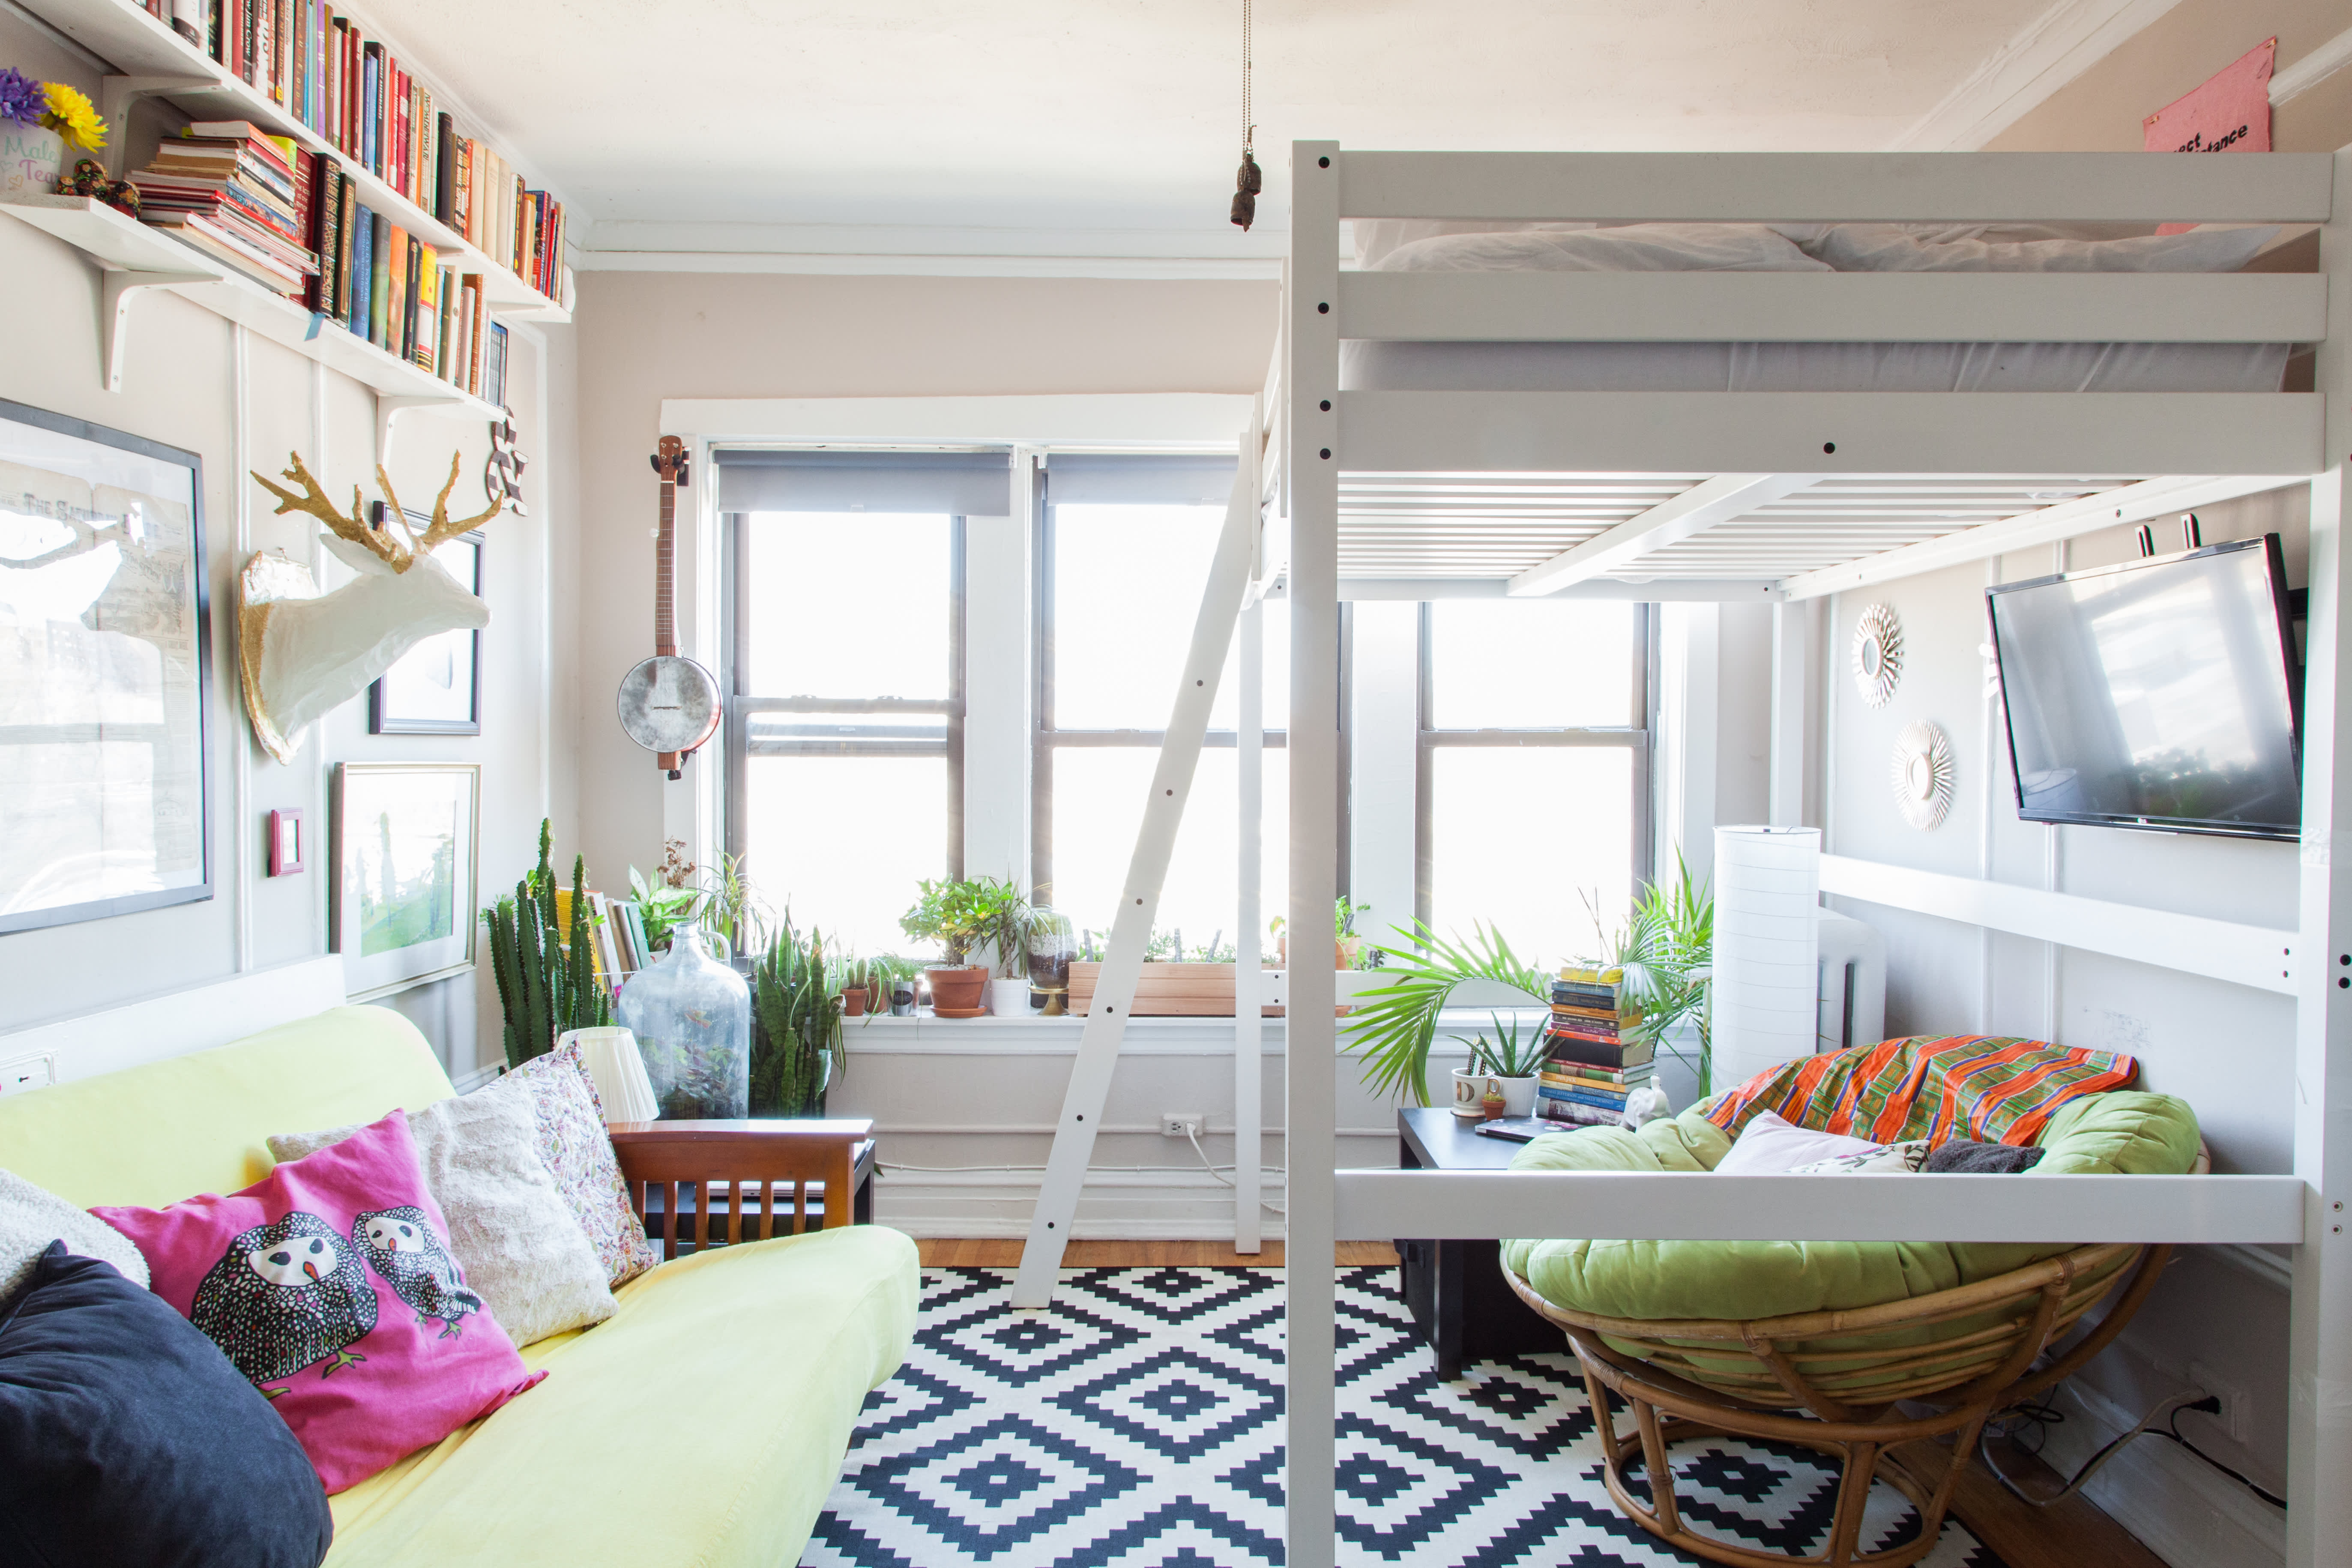 7 Apartment Design Ideas to Maximize Limited Space